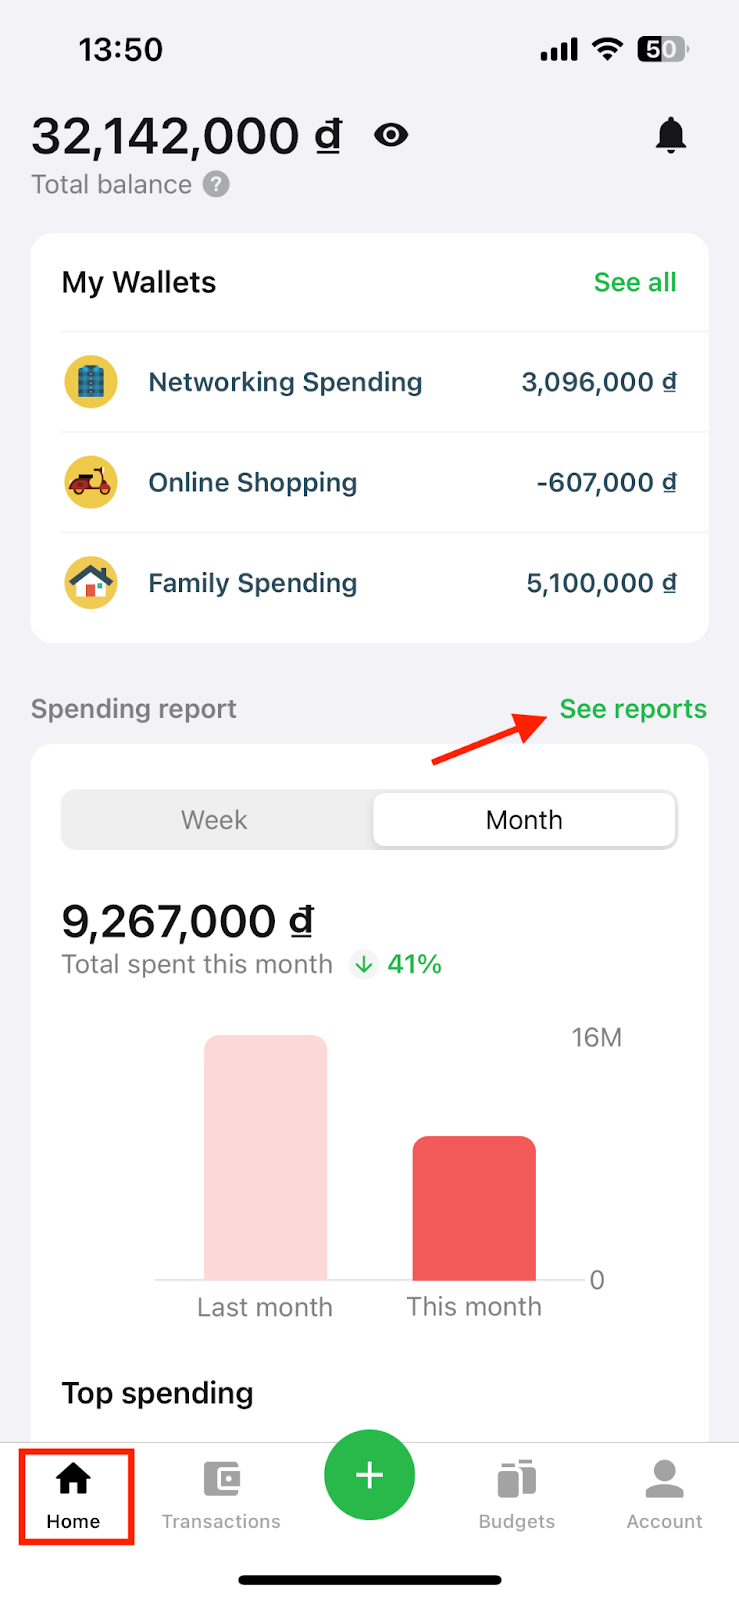 see-report-from-cashbook-screen